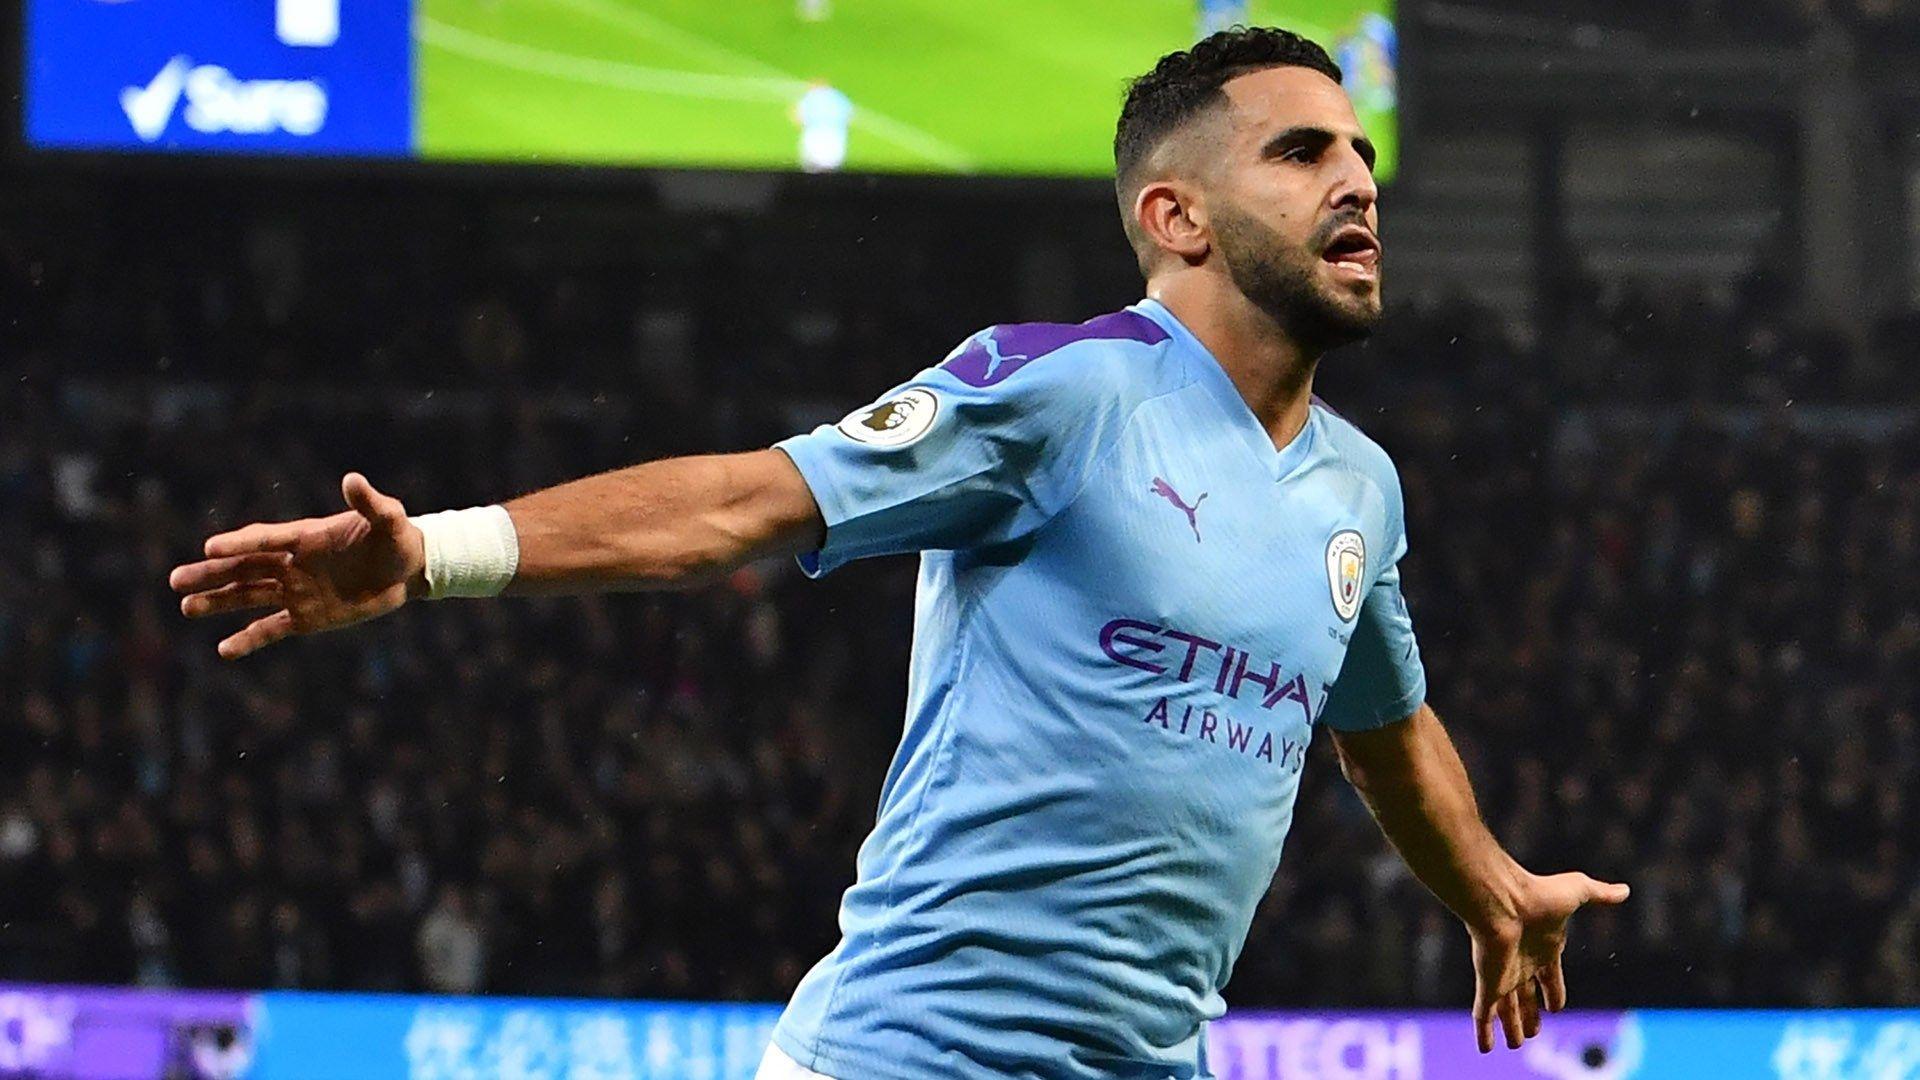 Mahrez Becomes the 9th African to Score 50 Goals in the EPL